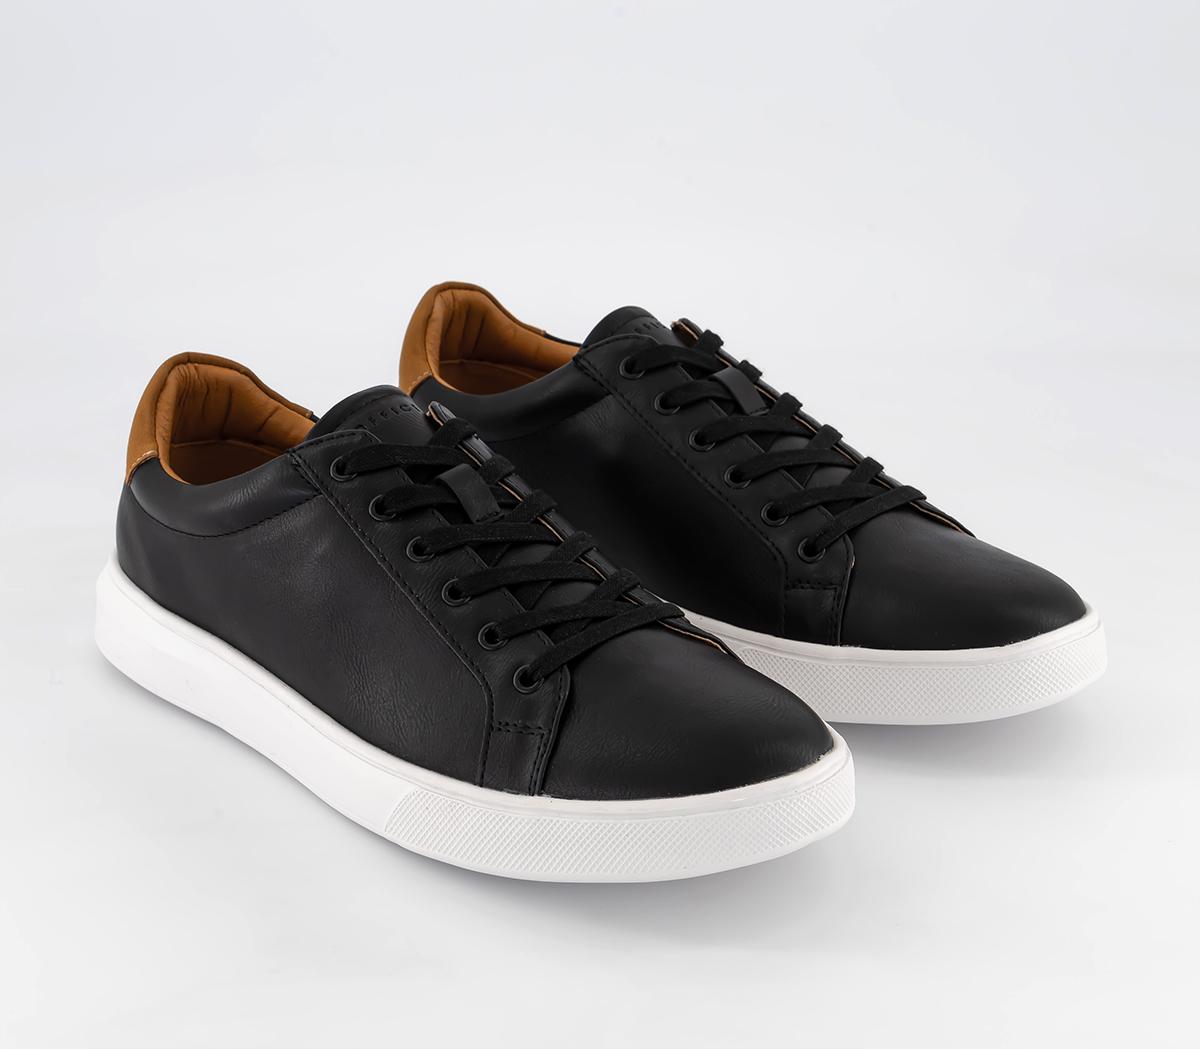 OFFICE Chapel Lace To Toe Sneakers Black - Men's Casual Shoes